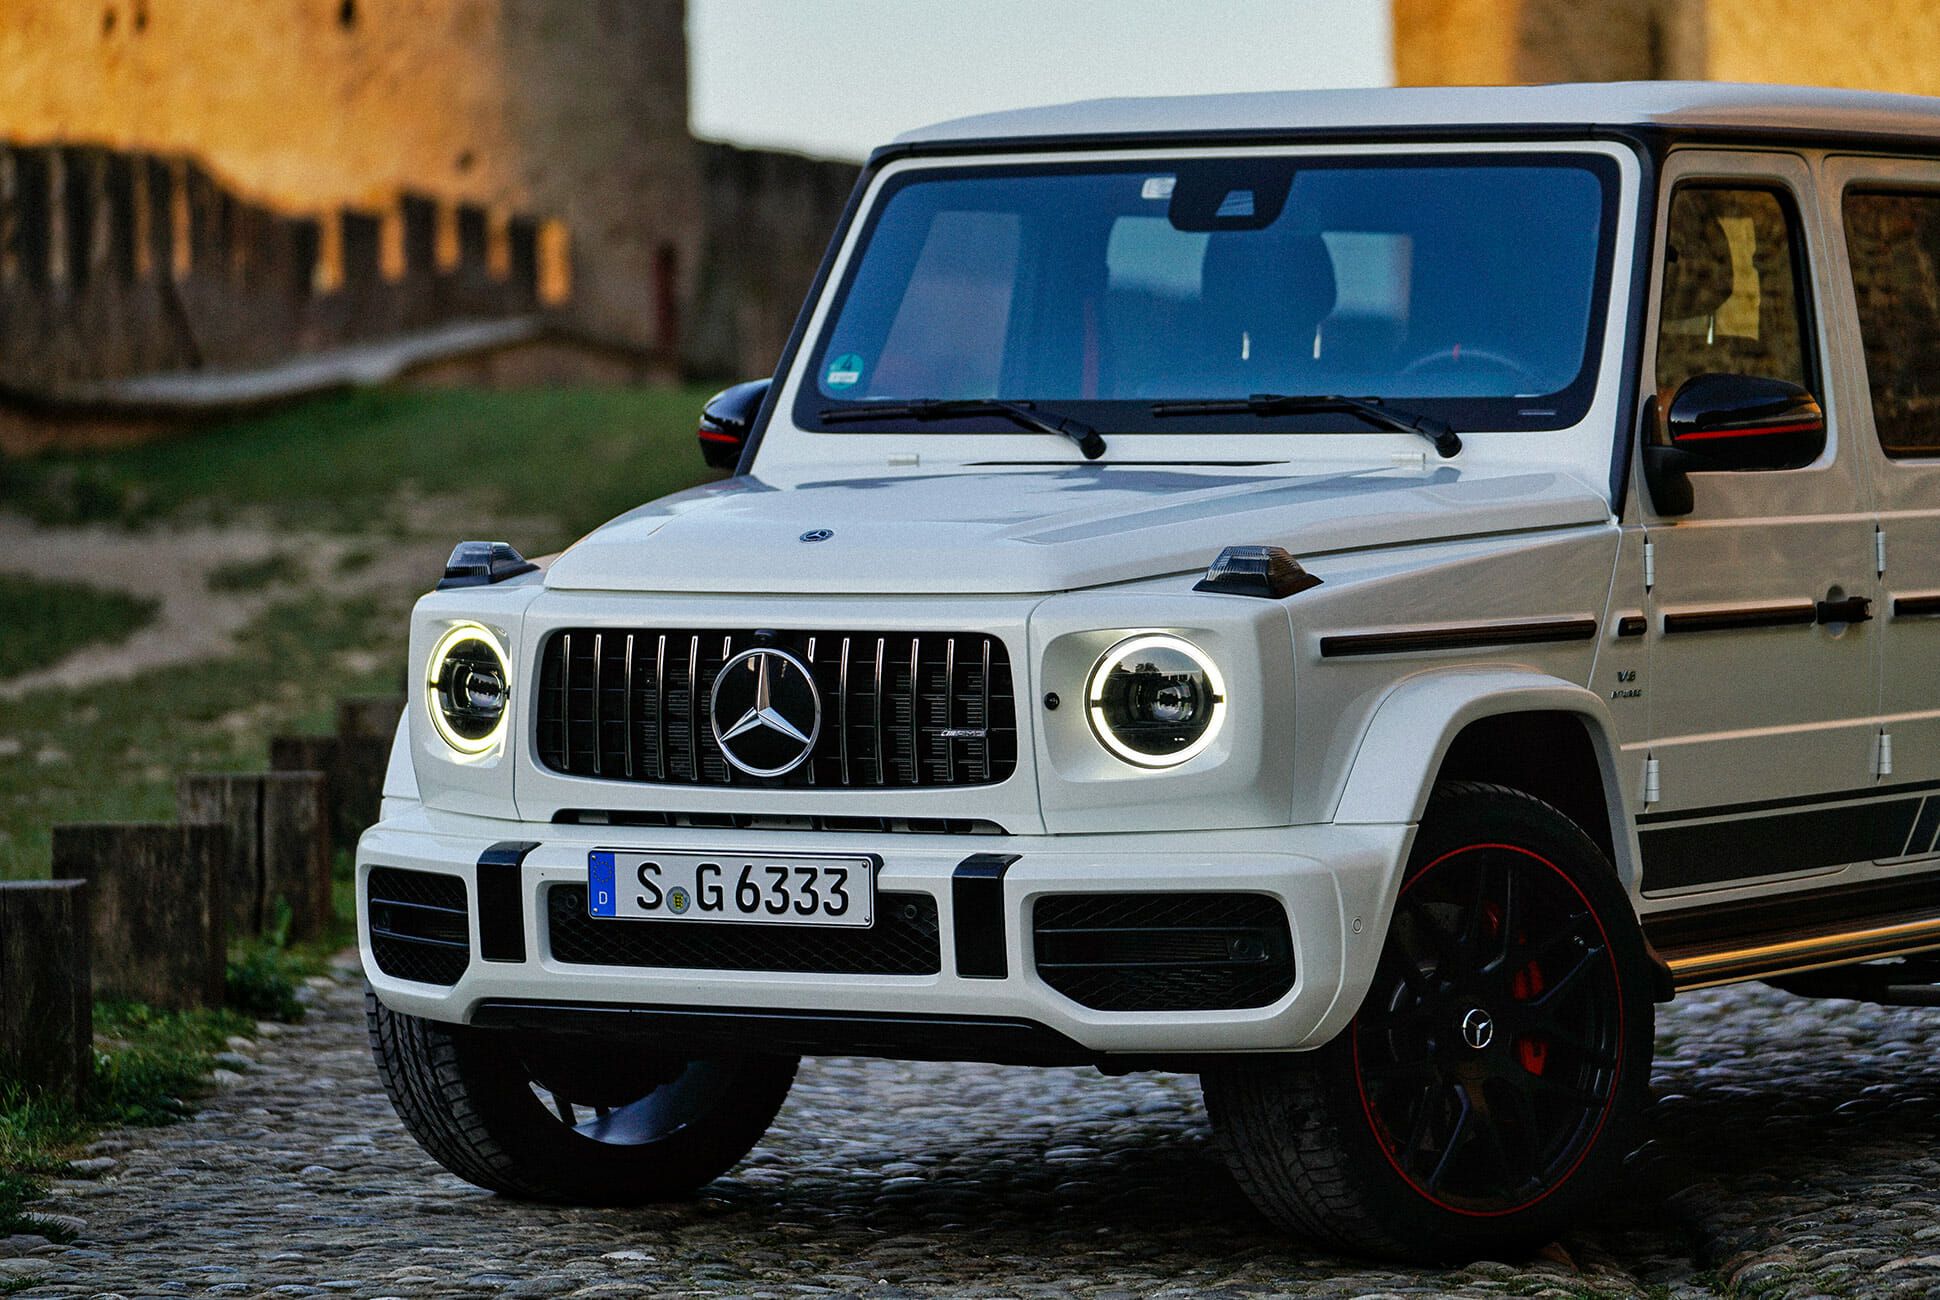 Mercedes G-Class Review: The All-New, Legendary G-Wagen Remains Iconic